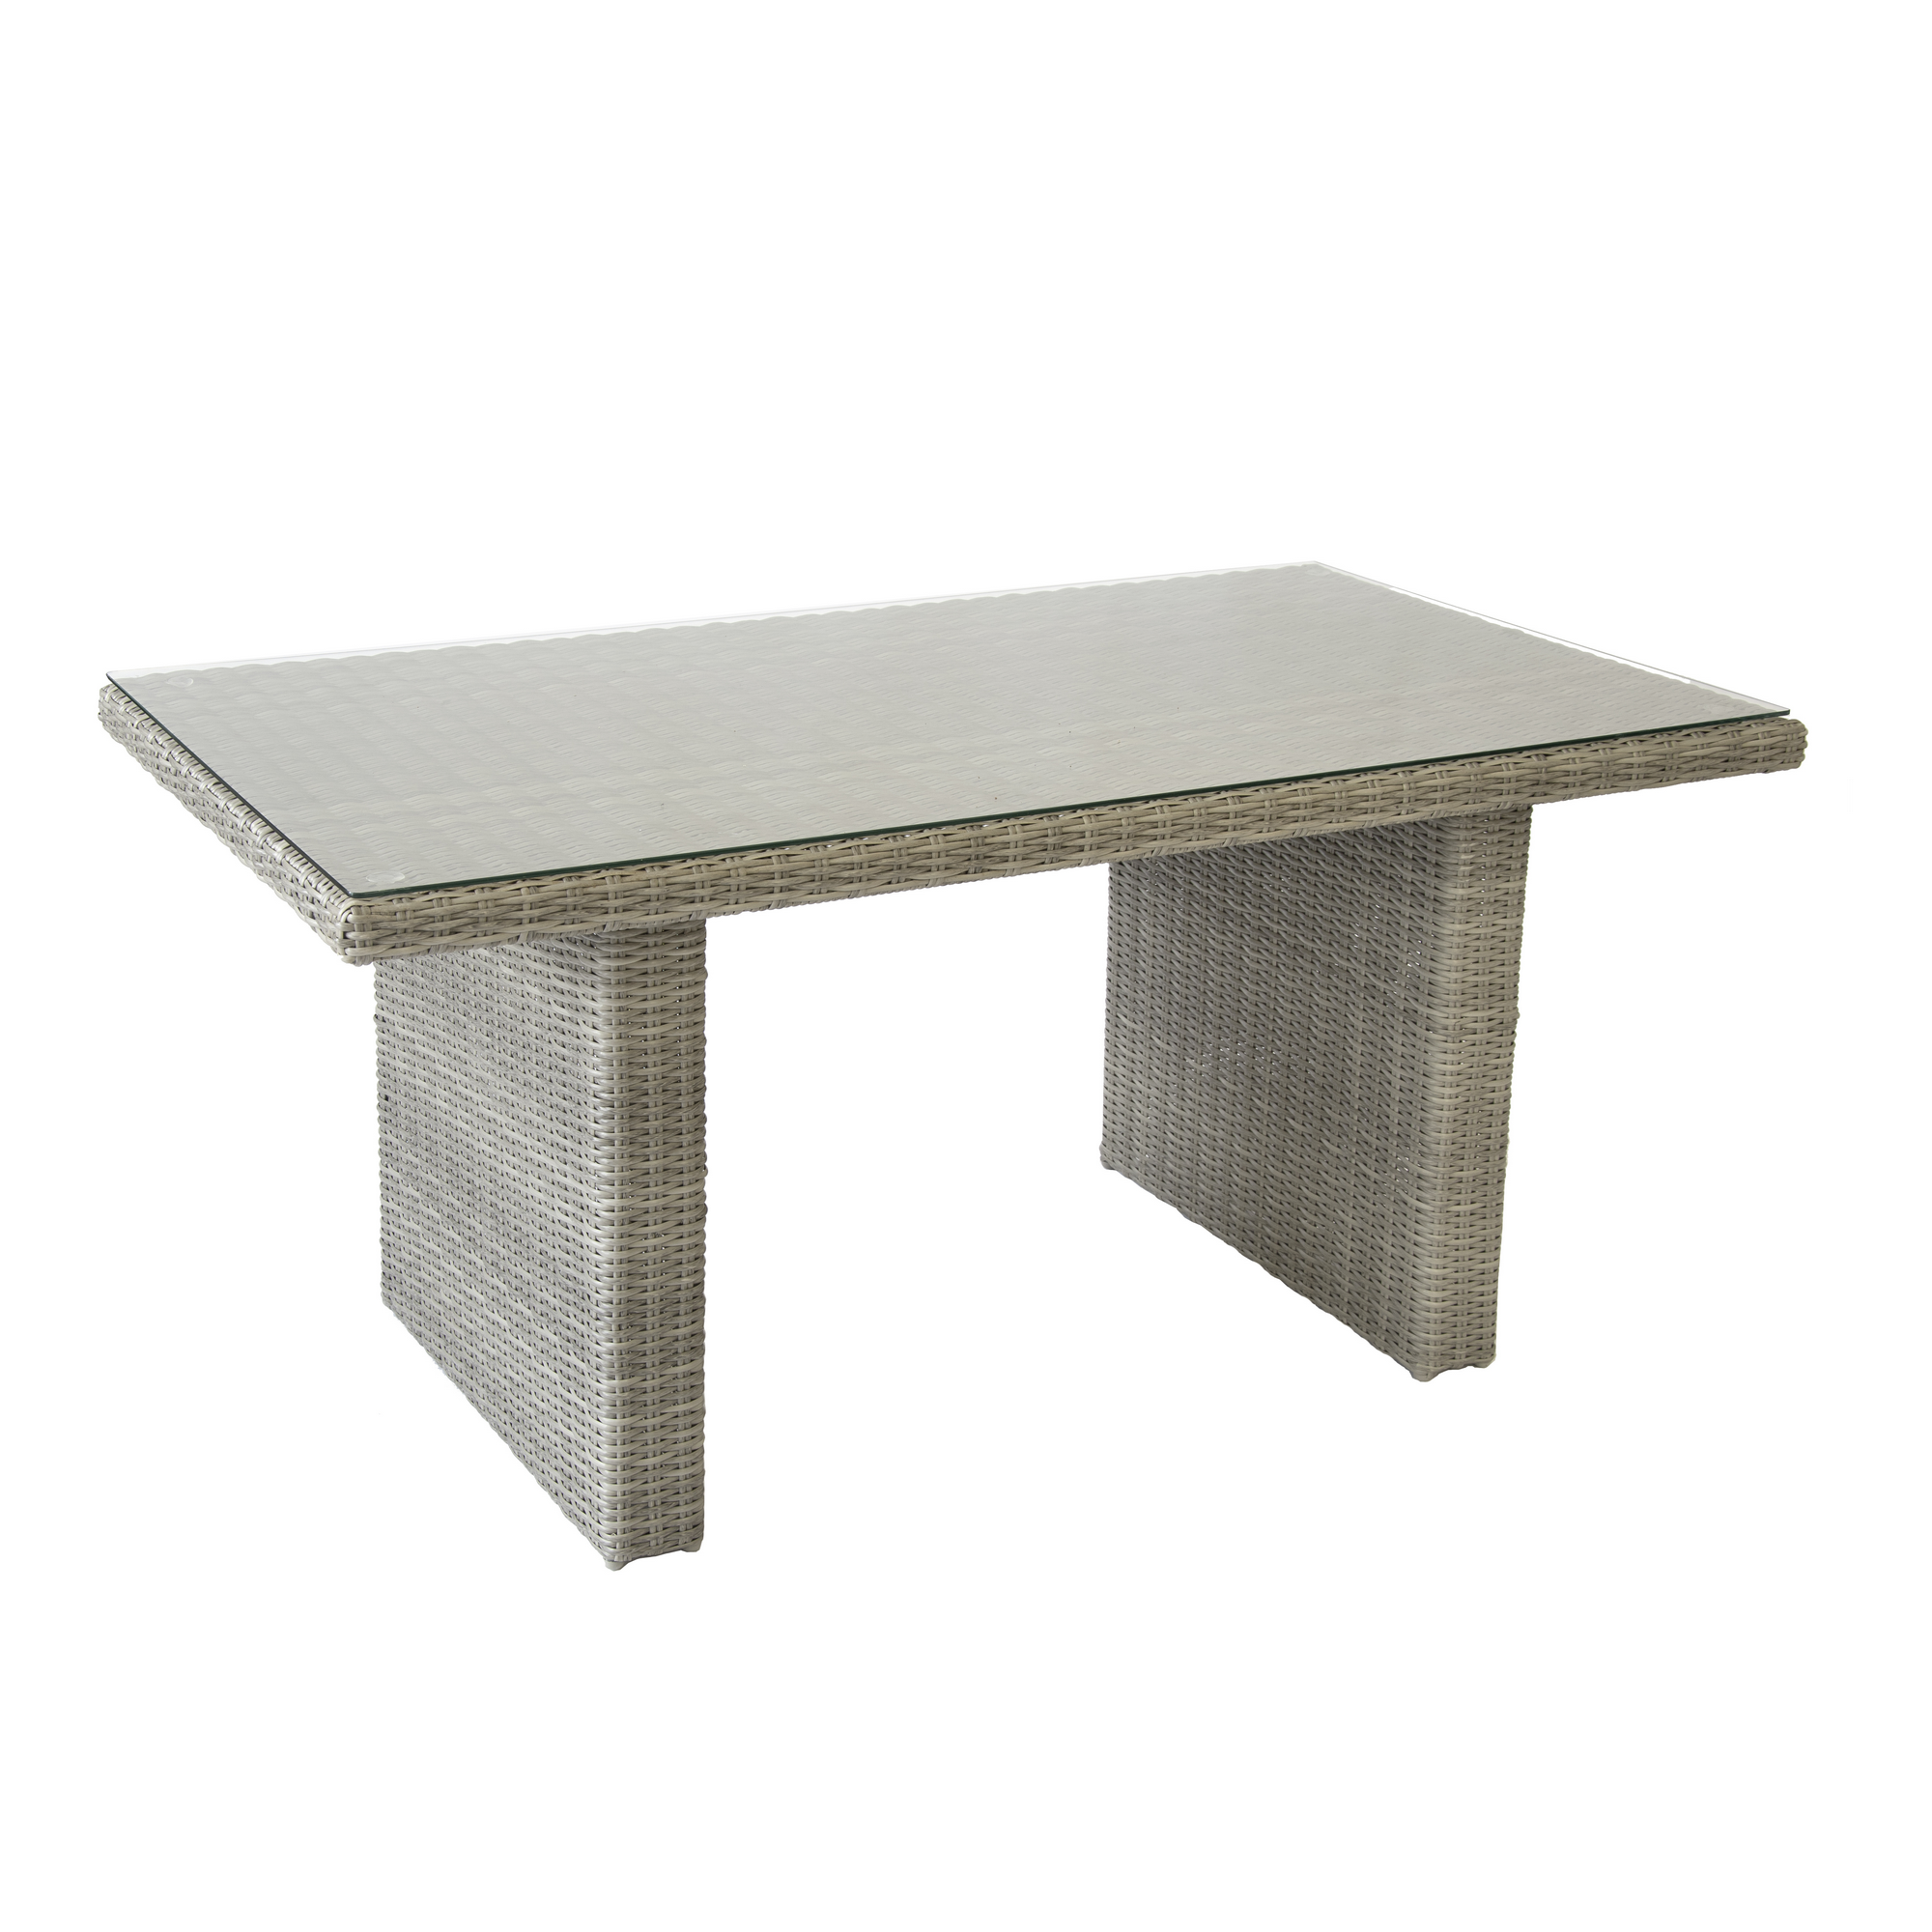 Dining-Lounge 'Canelli' grau 6-teilig + product picture